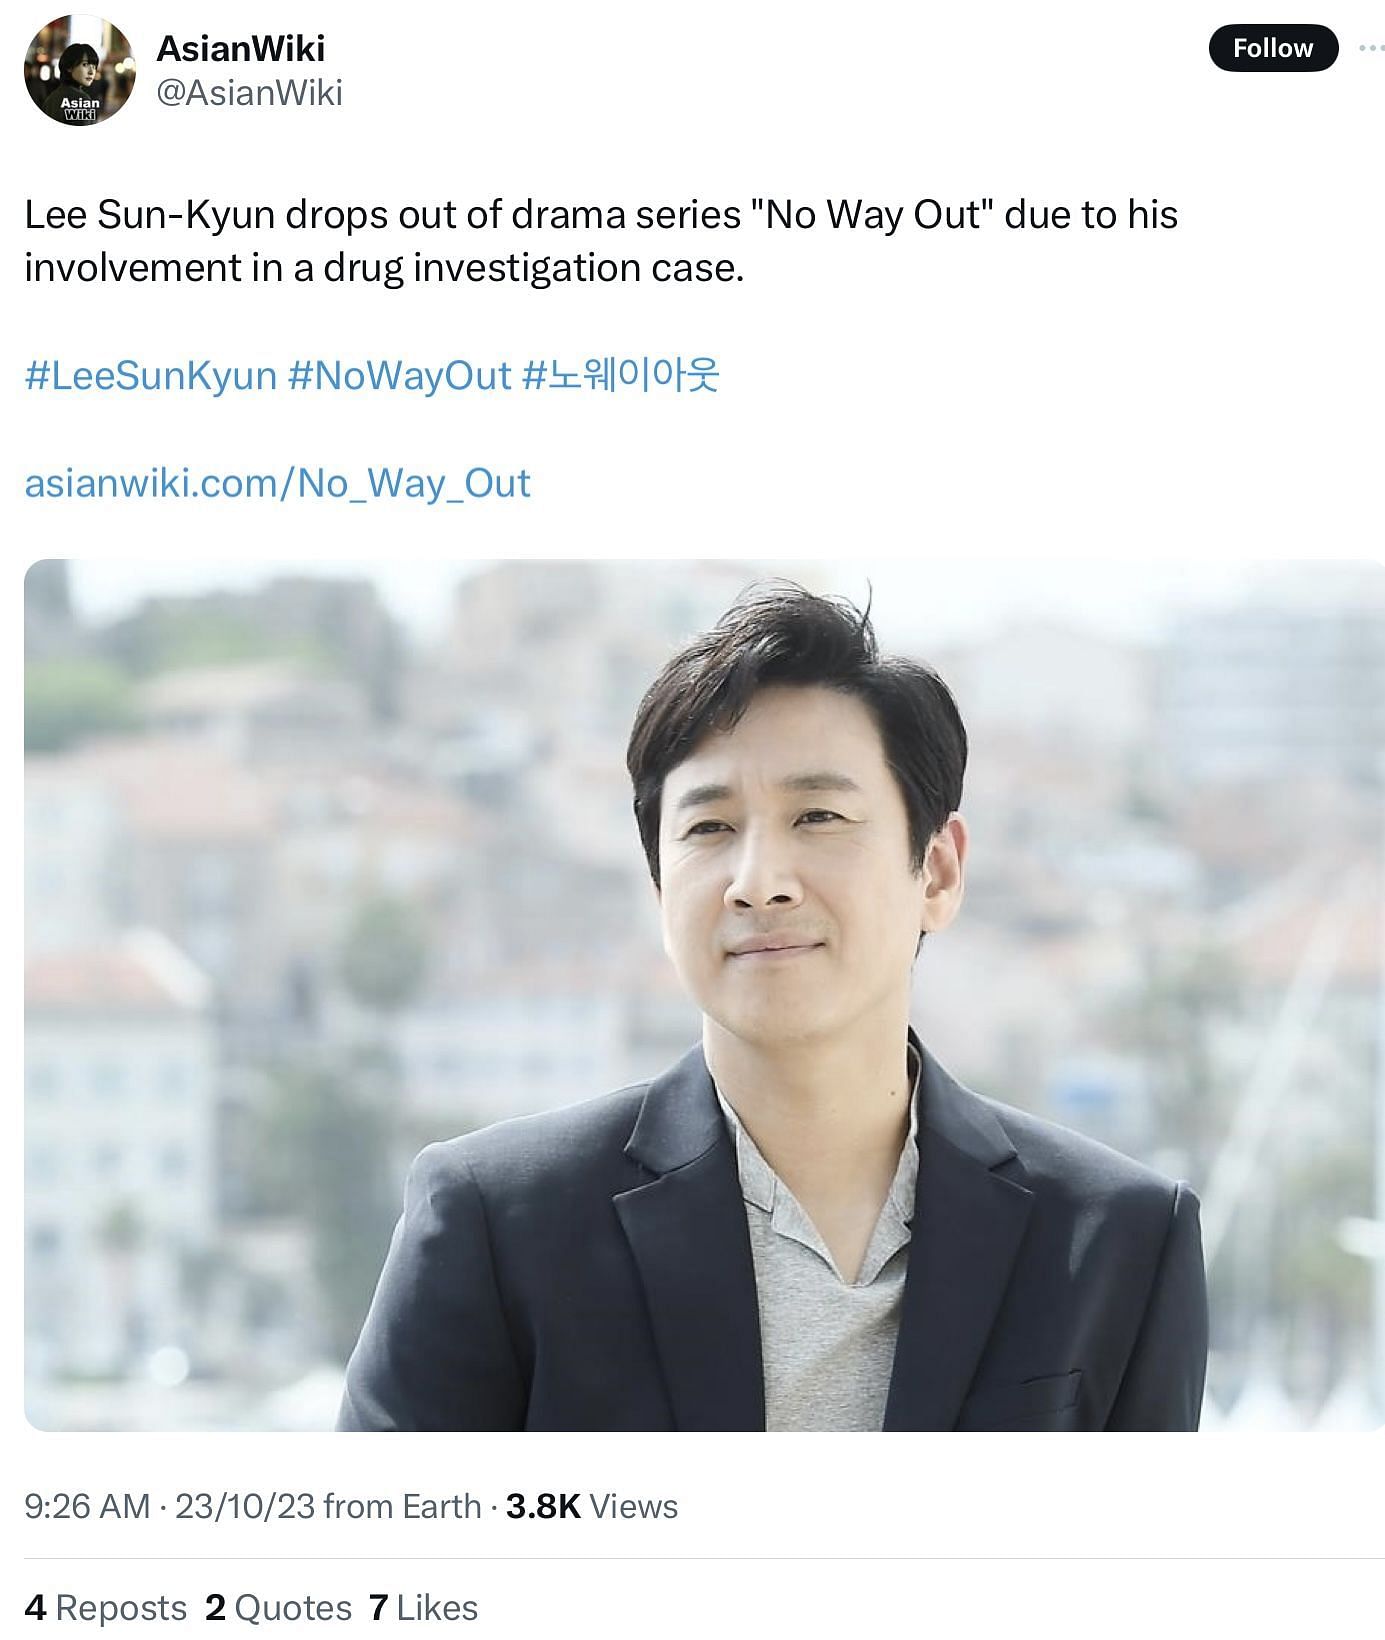 Lee Sun-kyun steps down from No Way Out following drug allegations (Image via @AsianWiki/X)